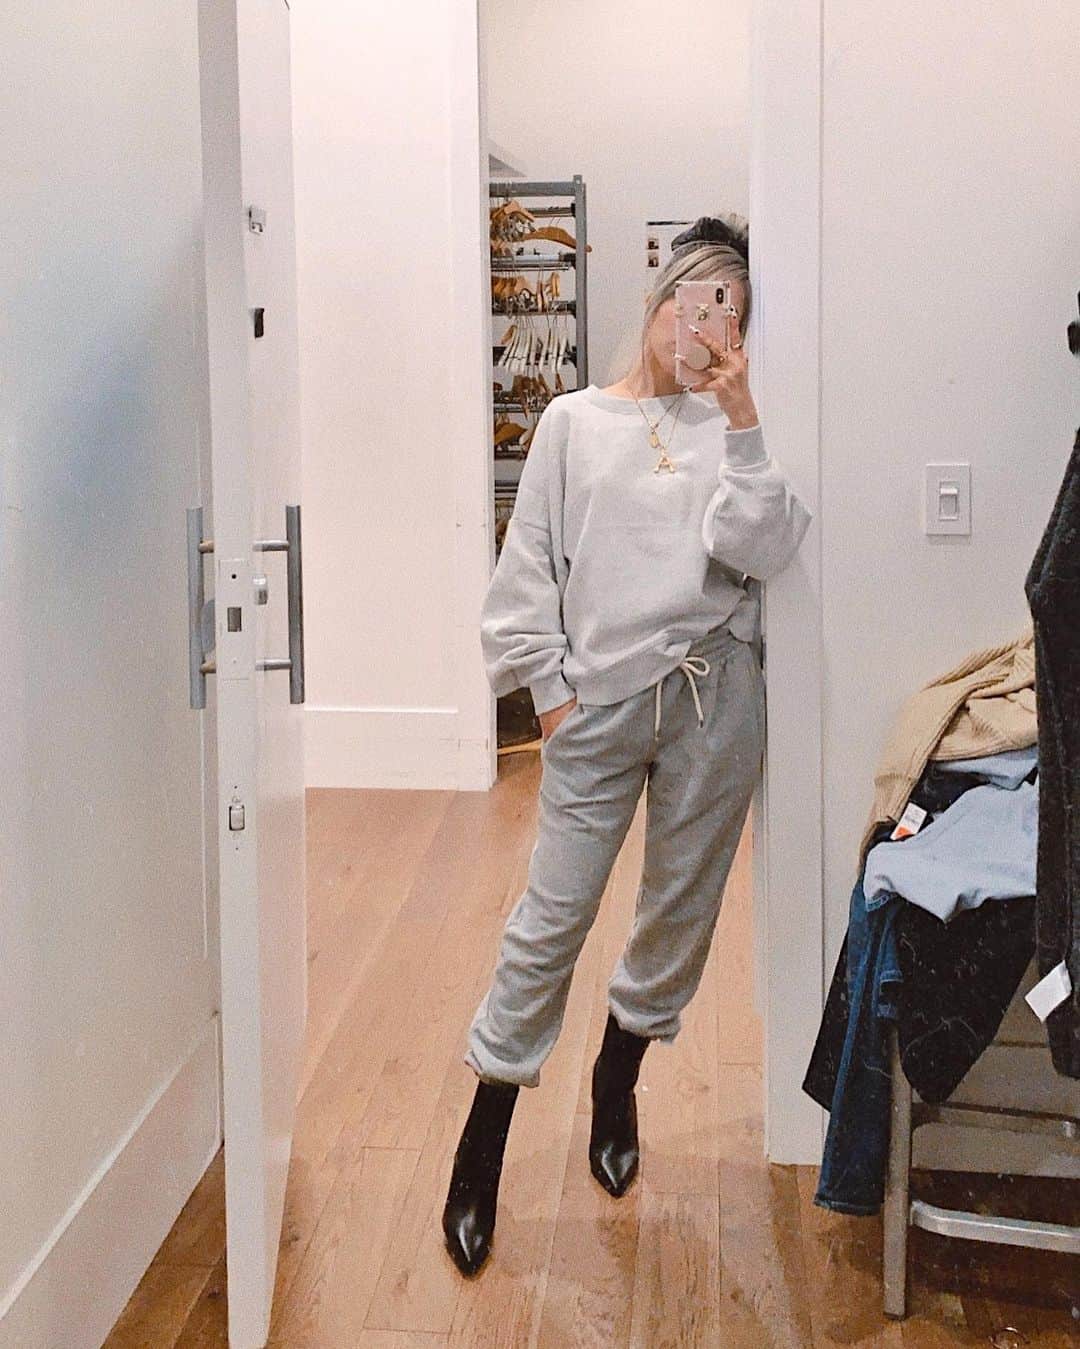 AikA♡ • 愛香 | JP Blogger • ブロガーさんのインスタグラム写真 - (AikA♡ • 愛香 | JP Blogger • ブロガーInstagram)「Casual mirror ootd in a fitting room 🐒 I've been living in this sweatshirt and sweat pants for the last week cuz they are so comfy and no shame at all 🤍 @gap ﻿ The shades of grays are slightly off from each other but I don’t care 🤷🏻‍♀️ Just make it work babyy 🤑 ﻿ Wore this look with my martens, leopard coat & the messiest bun + clear glasses for a movie last night 🎞🍿🥤( on my stories 👀 Also new few 🎌 words for you to learn!! ) Linked both on stories! The sweatshirt is currently for only $19.99 🙌🏻#whatasteal ﻿ ﻿ @theinvisiblemanmovie was sooo good 👏🏻✨ Have you guys watched!? 🎬 #theinvisibleman ﻿ ⋆ ⋆ ⋆ ⋆ ﻿ ﻿ 最近見つけたスウェットがめっちゃお気に入り🤍 @gap_jp ﻿ 上下少しだけ色違うけど、気にしない〜🤷🏻‍♀️🤑﻿ 自分が可愛い❣️って直感したらGETして﻿ おしゃれに着こなせちゃえば良いの🙈w﻿ 昨日ゎこの上下に﻿ マーチン + ヒョウ柄のコート + メッシーバン +﻿ クリアの伊達眼鏡で友達と映画ナイト🎞🍿🥤﻿ ストーリーズ載せたょ🖤 日本のサイトでトップスゎ同じにのなかったけど﻿ スエットゎ同じのあったから﻿ ハイライトの【SHOP】に保存してあるよ！﻿ ﻿ #透明人間 めっちゃ面白かったぁぁ👏🏻✨ ﻿ 日本ゎ5／1から公開だって🎬 ﻿ 5分に一回ビク！！ってなった🤣﻿ -﻿ #gap #sweatpants #comfyoutfit #mirrorselfies #fittingroomselfie #petitefashion #おちびコーデ」3月2日 12時30分 - aikaslovecloset